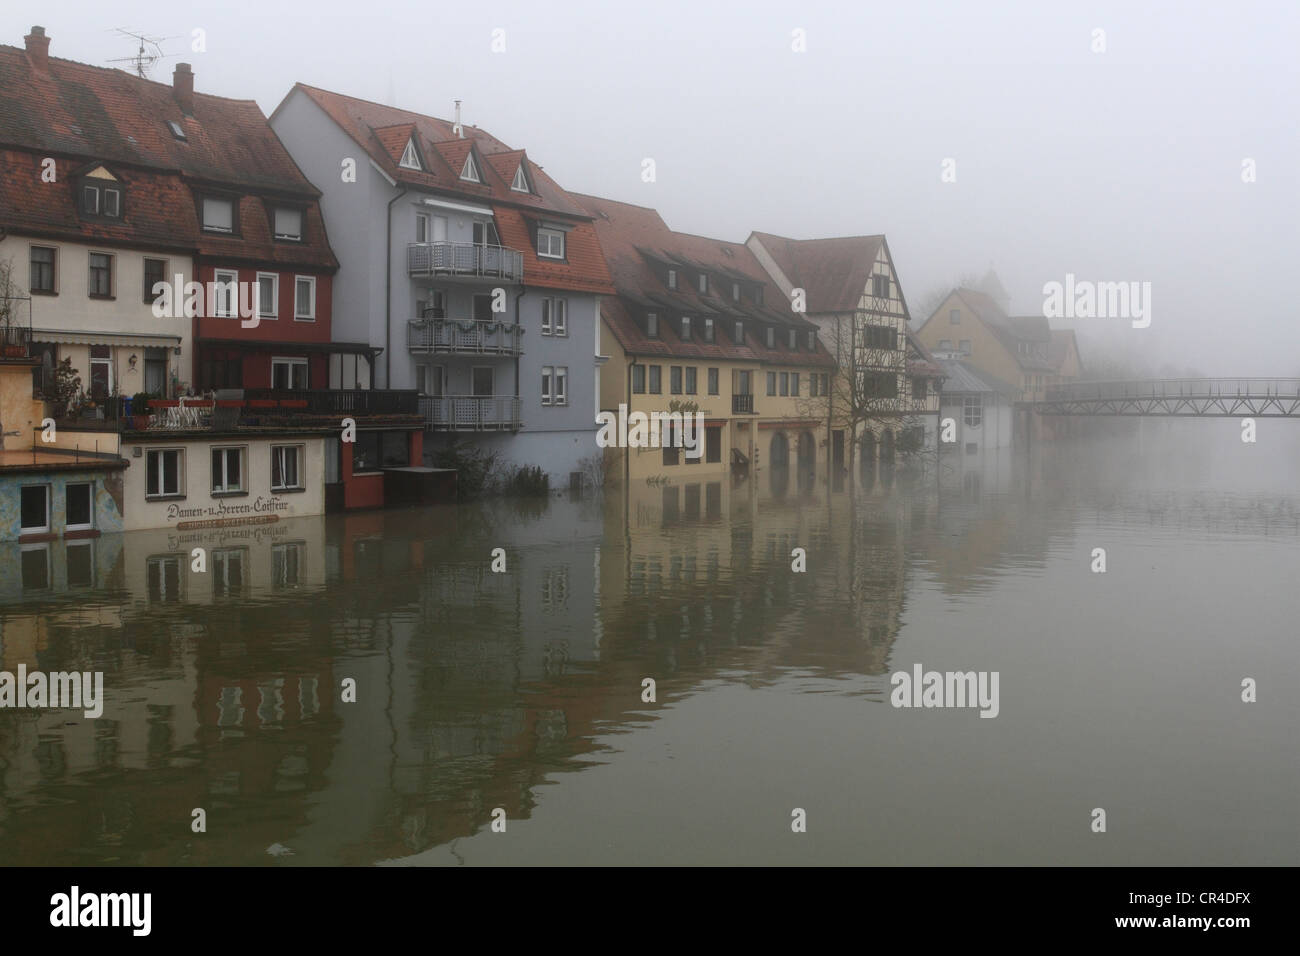 Floodwaters and fog, buildings on the bank of the Tauber river, seen from the Tauber river bridge on Bahnhofstrasse street from Stock Photo